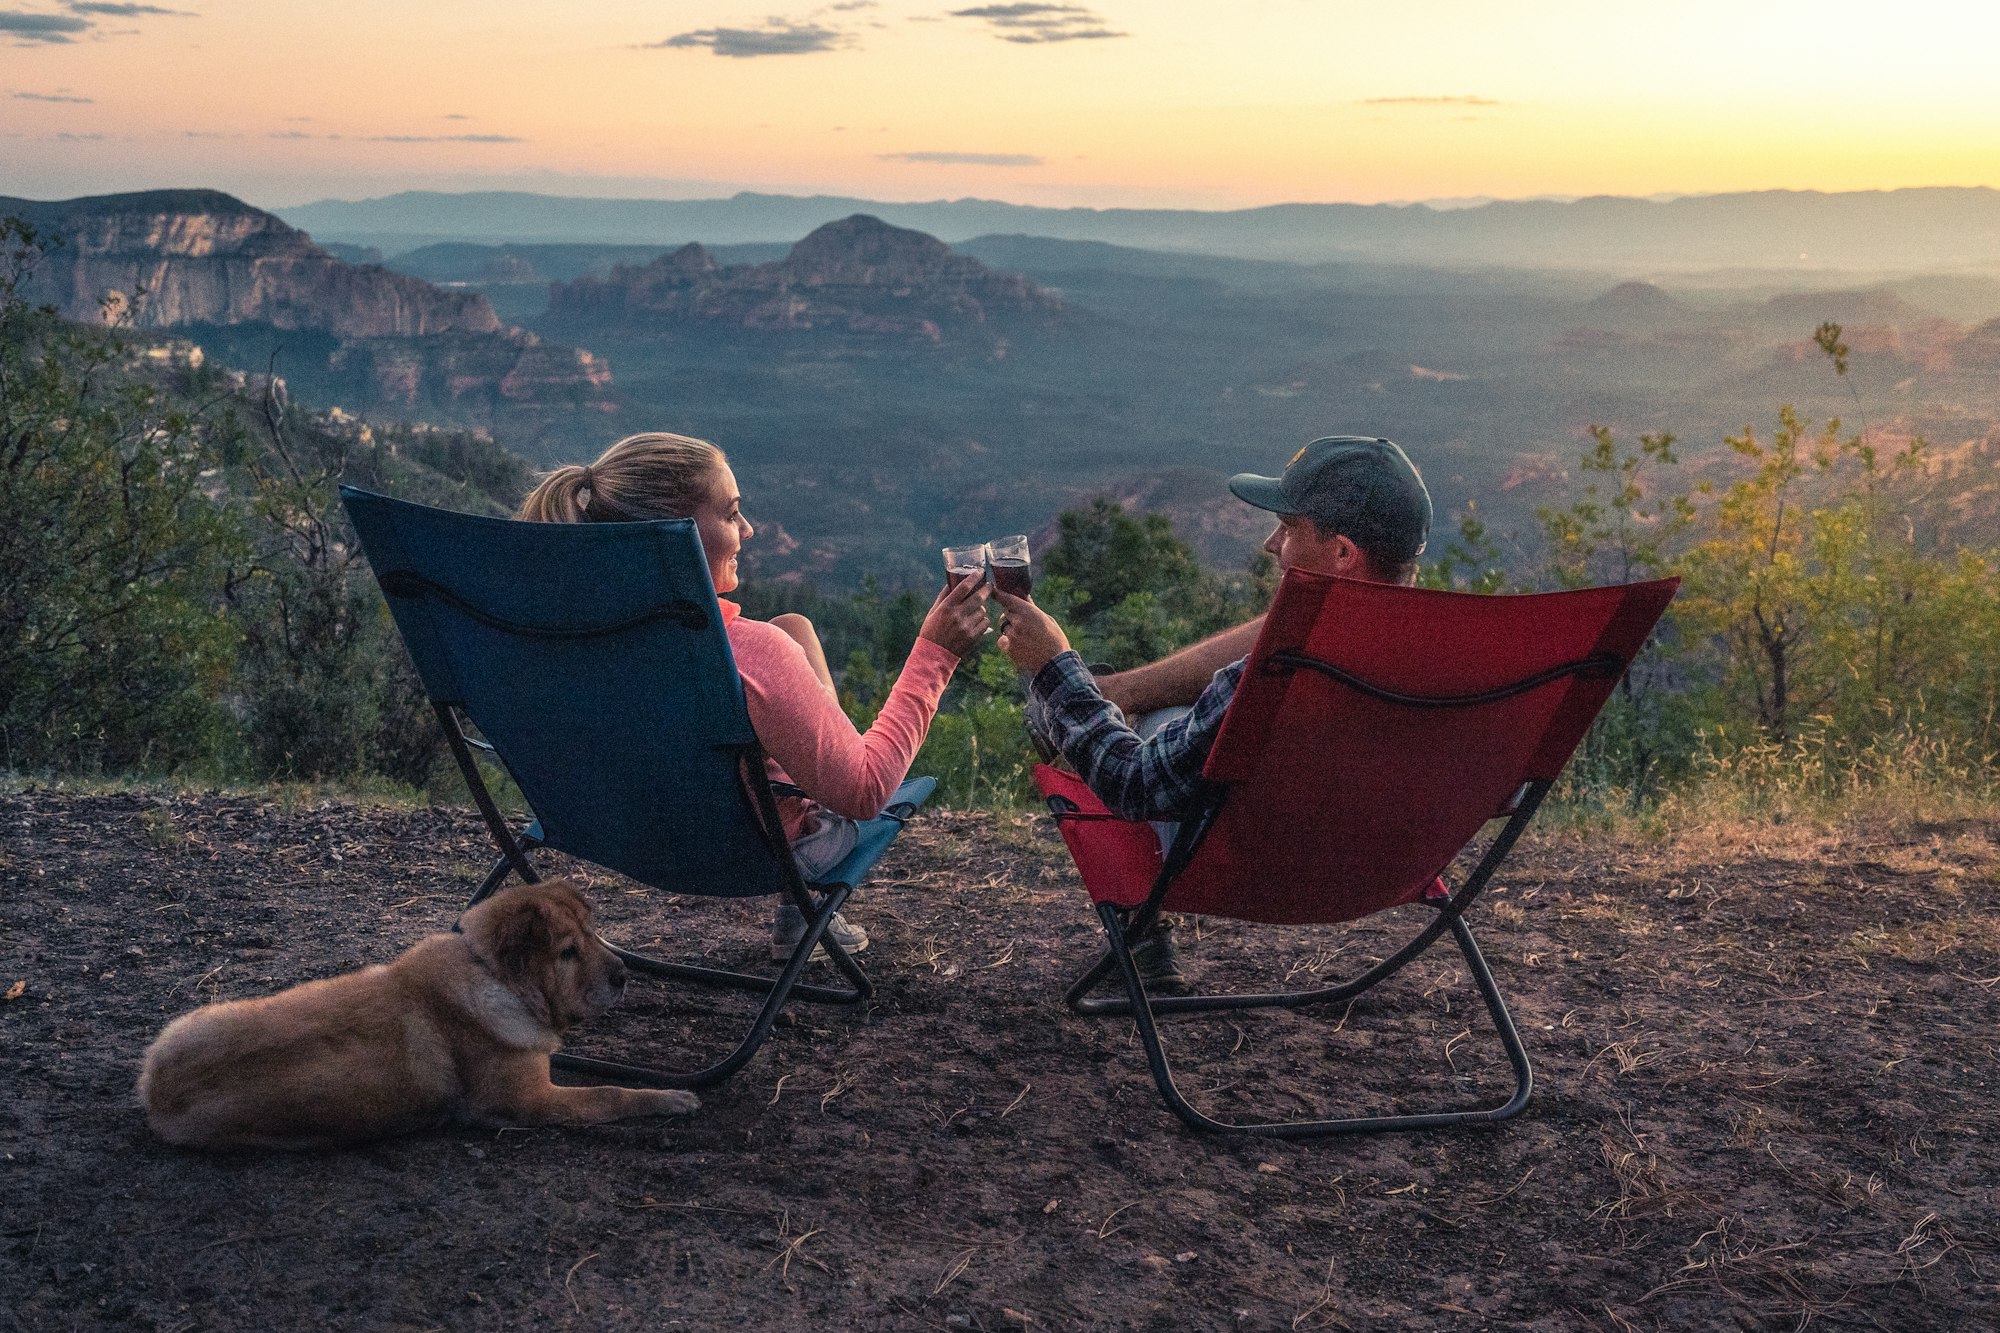 Camp in comfort with the best backpacking chairs of 2022